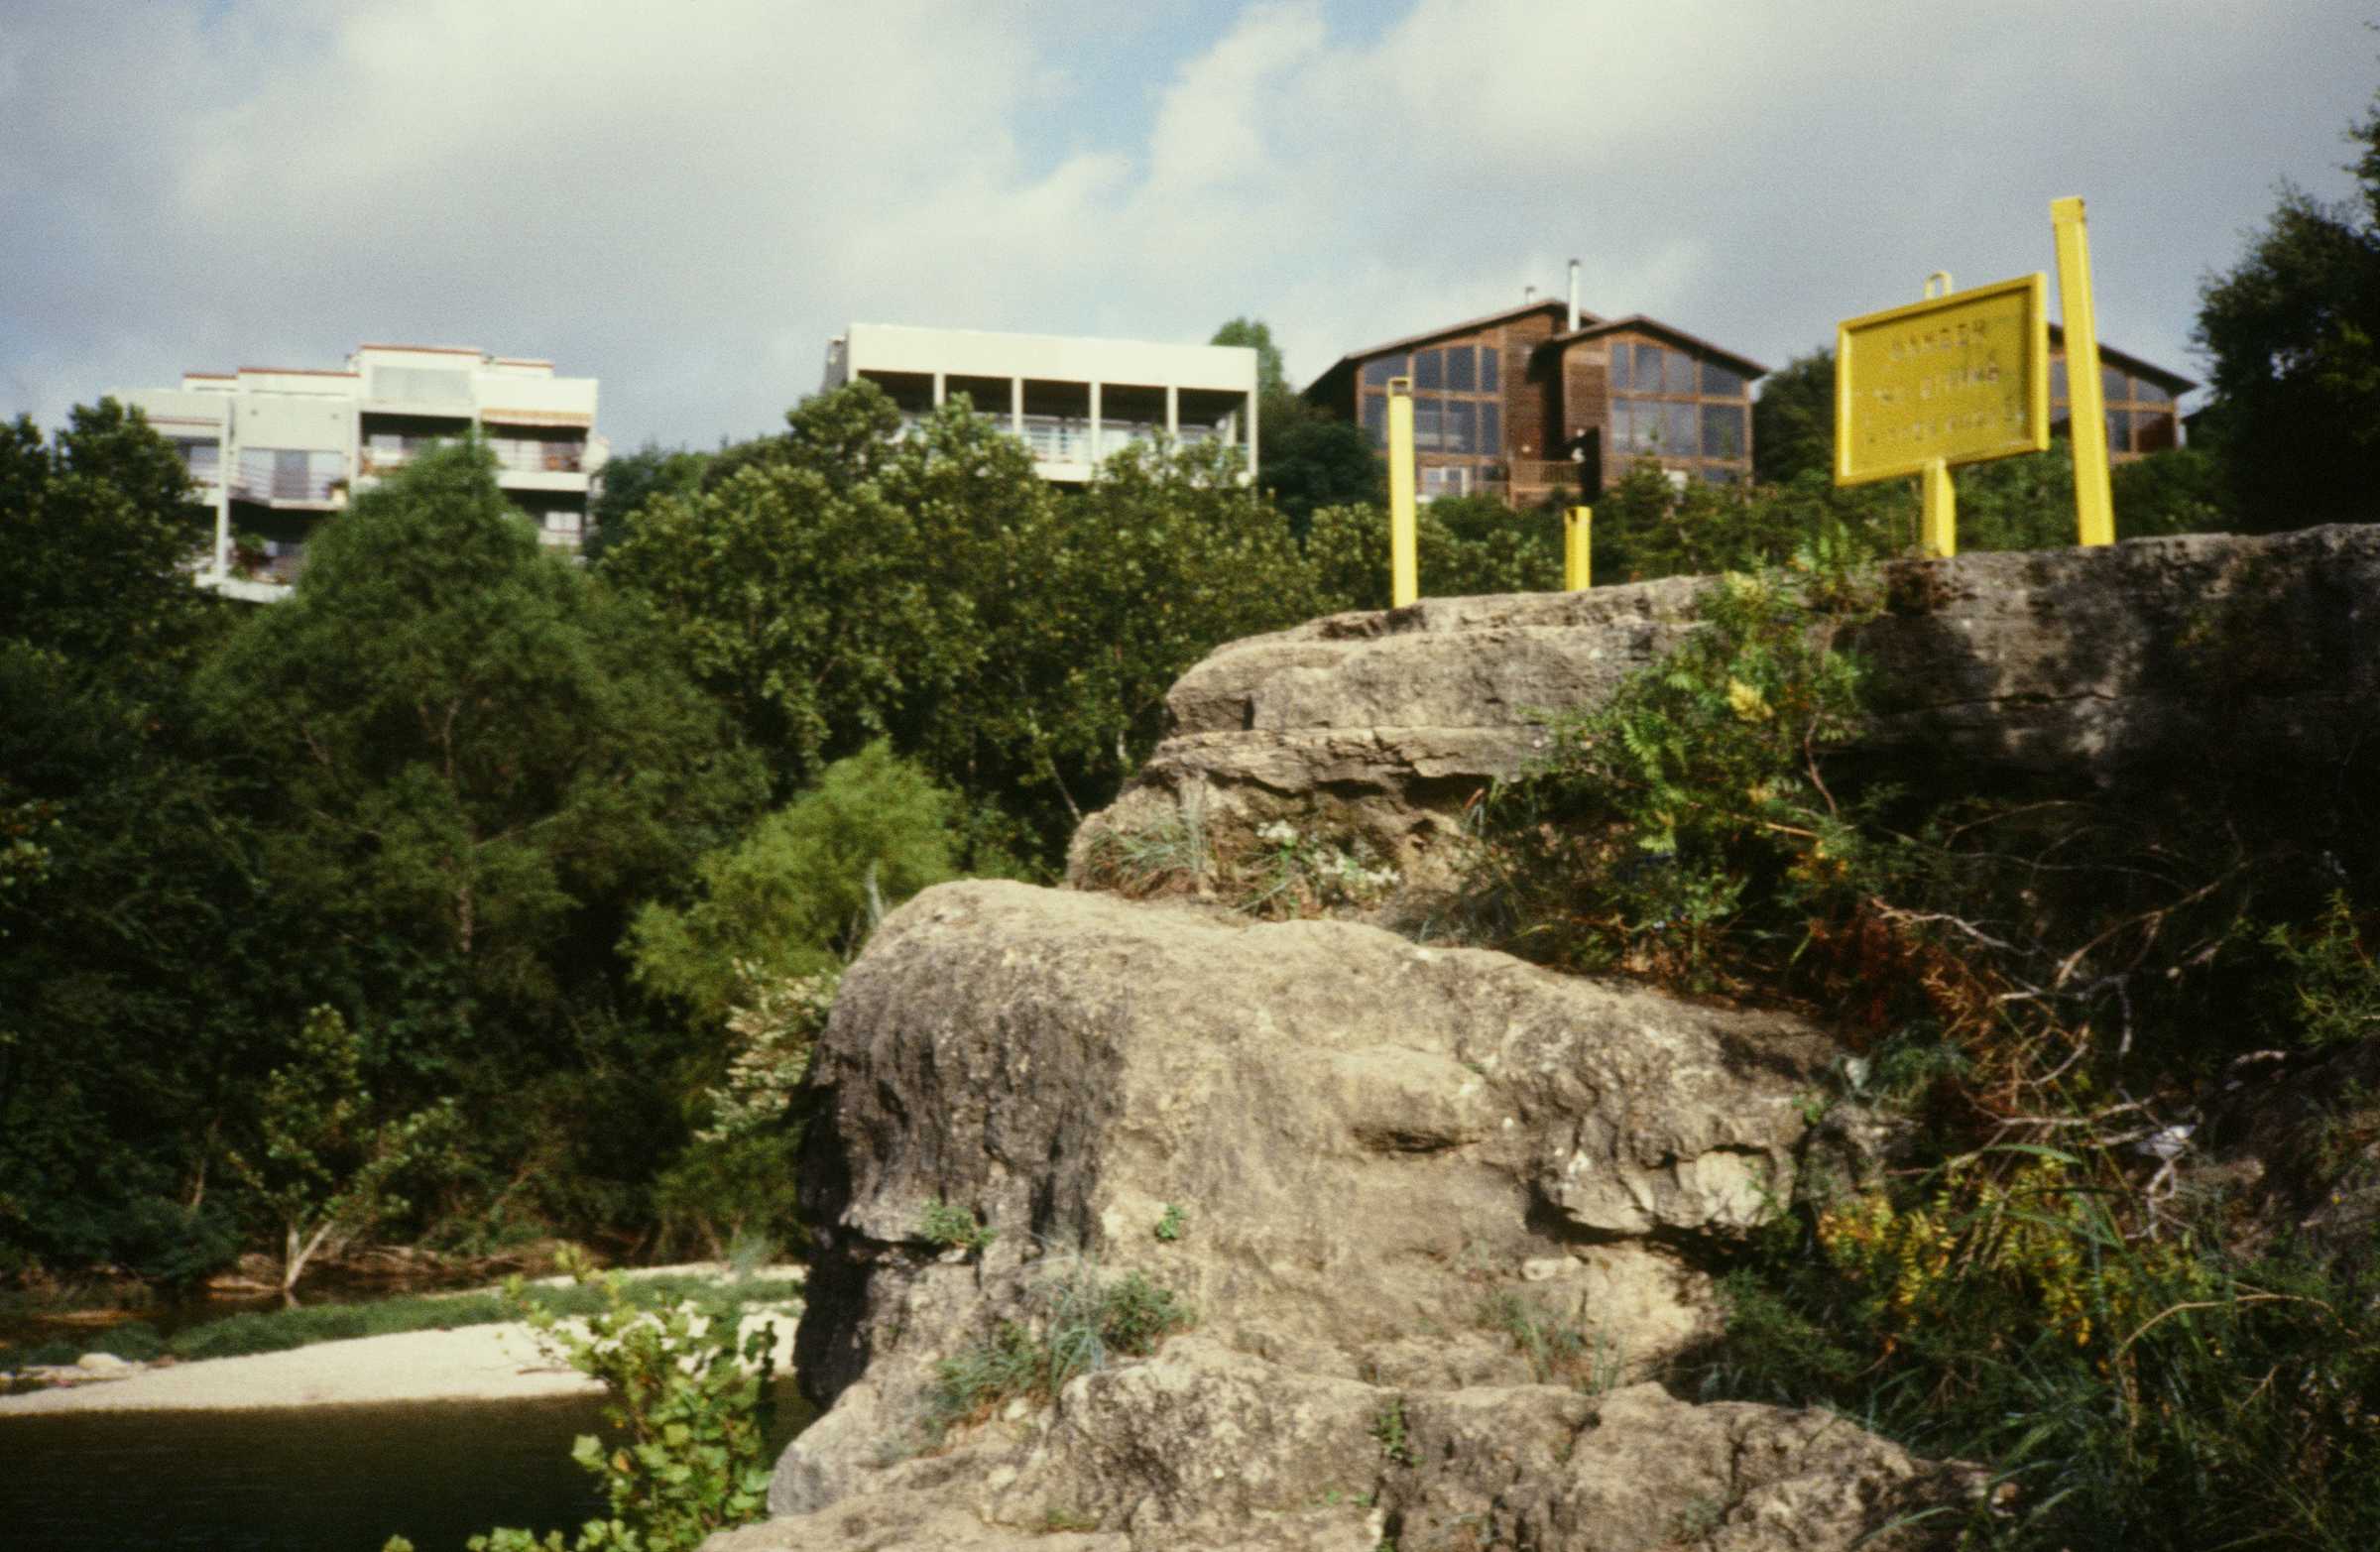 Homes overlooking Barton Creek at Campbell's Hole (Joe Riddell Personal Collection)